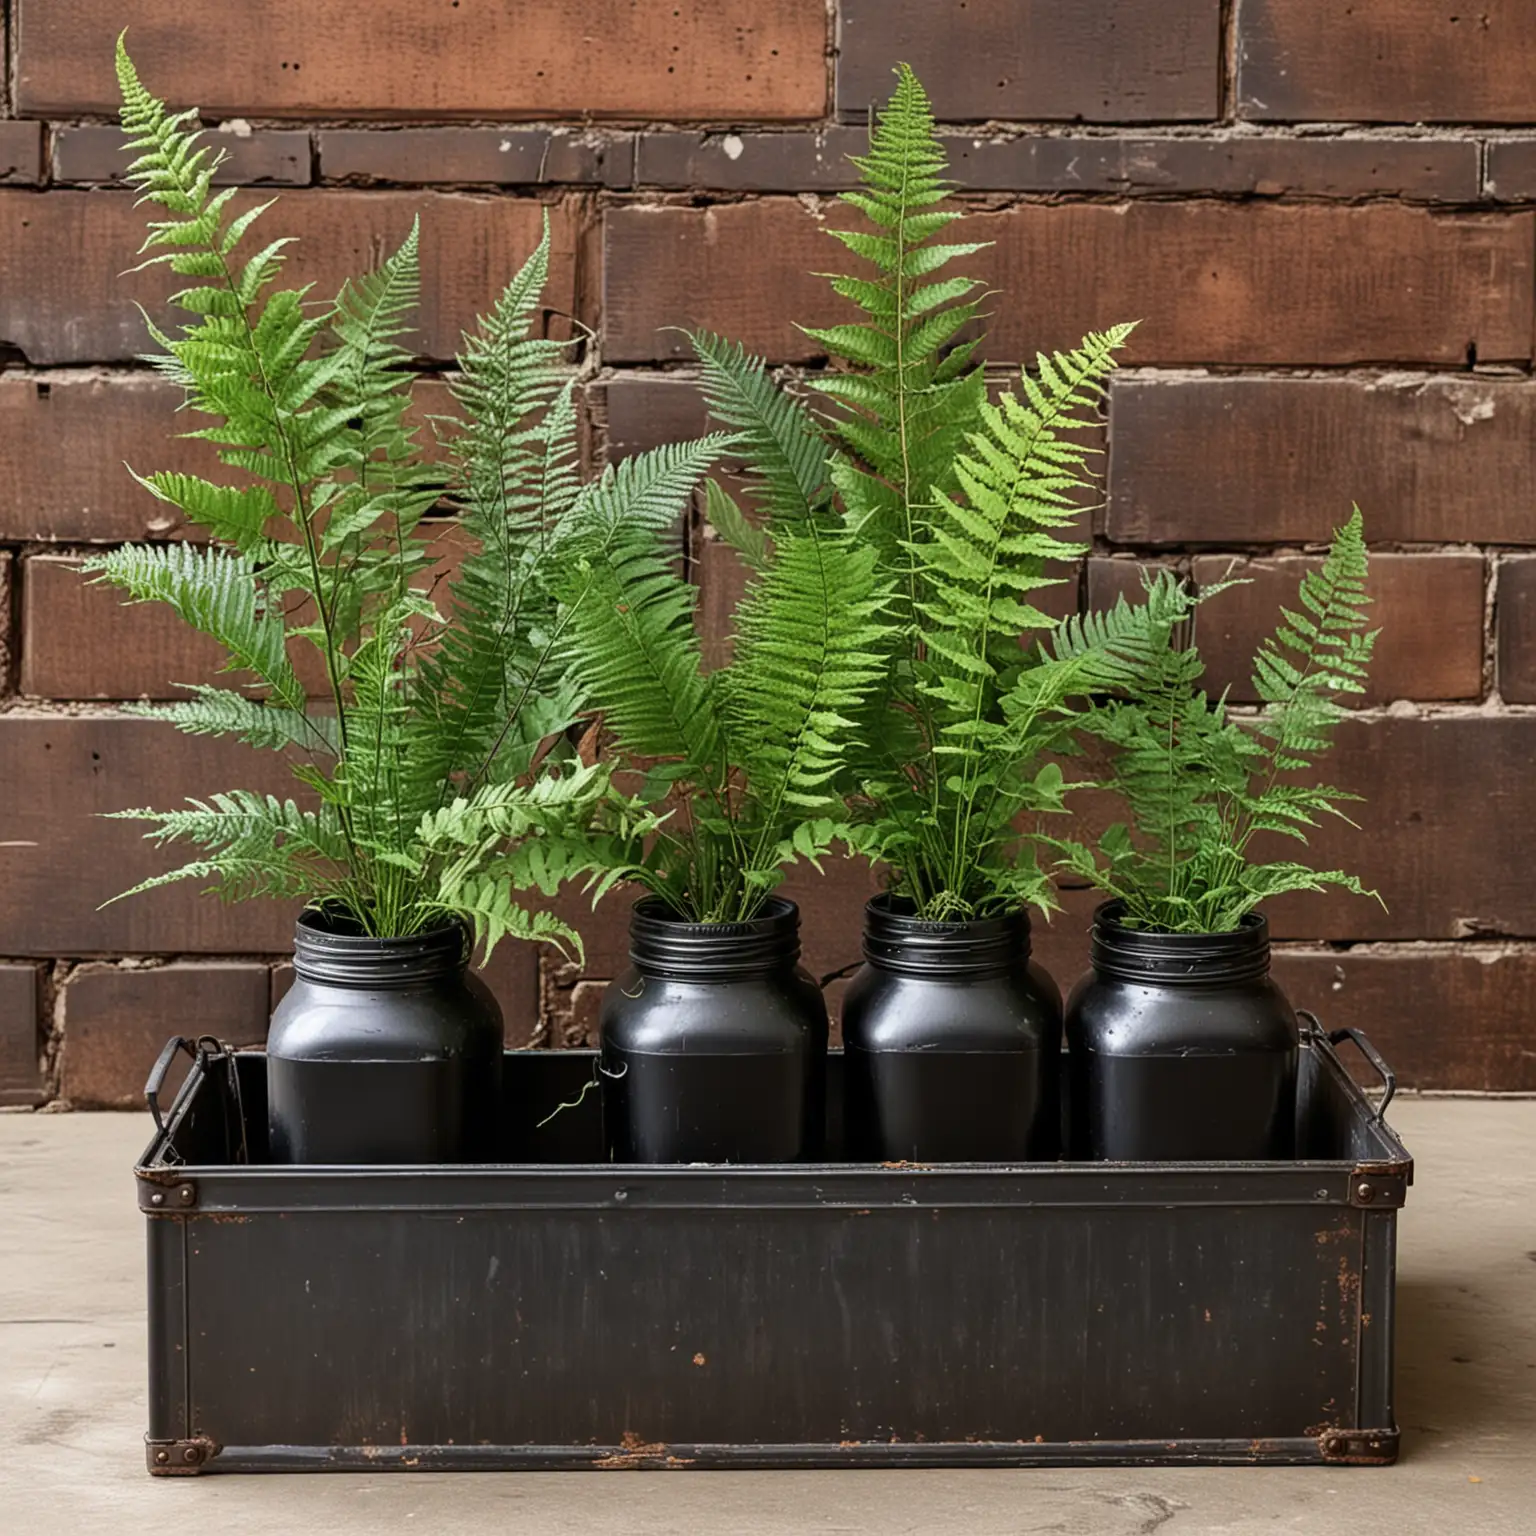 industrial centerpiece with black jars with modern ferns inside a rusted metal box; show with an industrial brick wall background